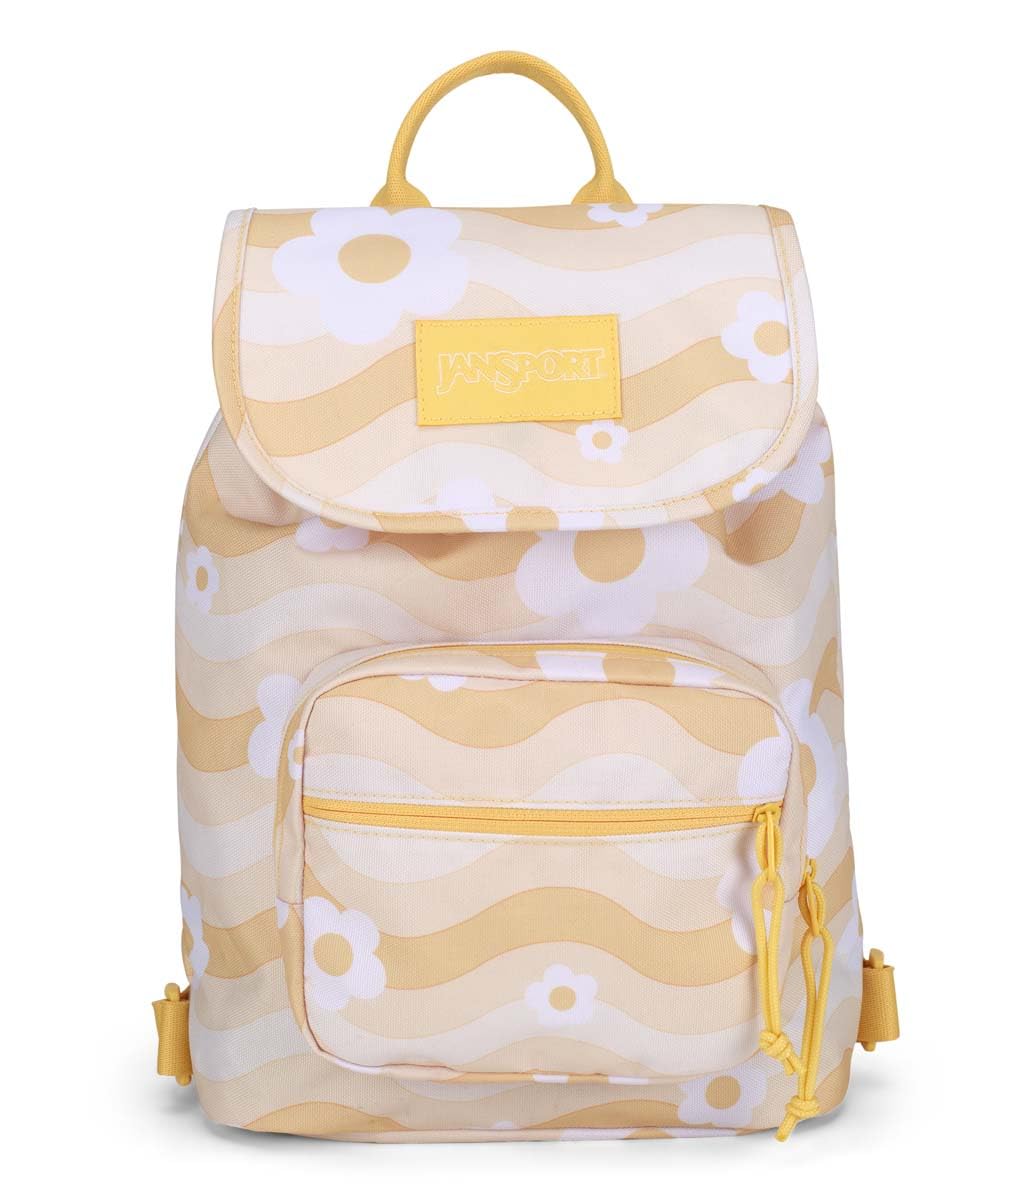 JanSport Highlands Mini Pack Backpack, Flower Power Yellow, One Size